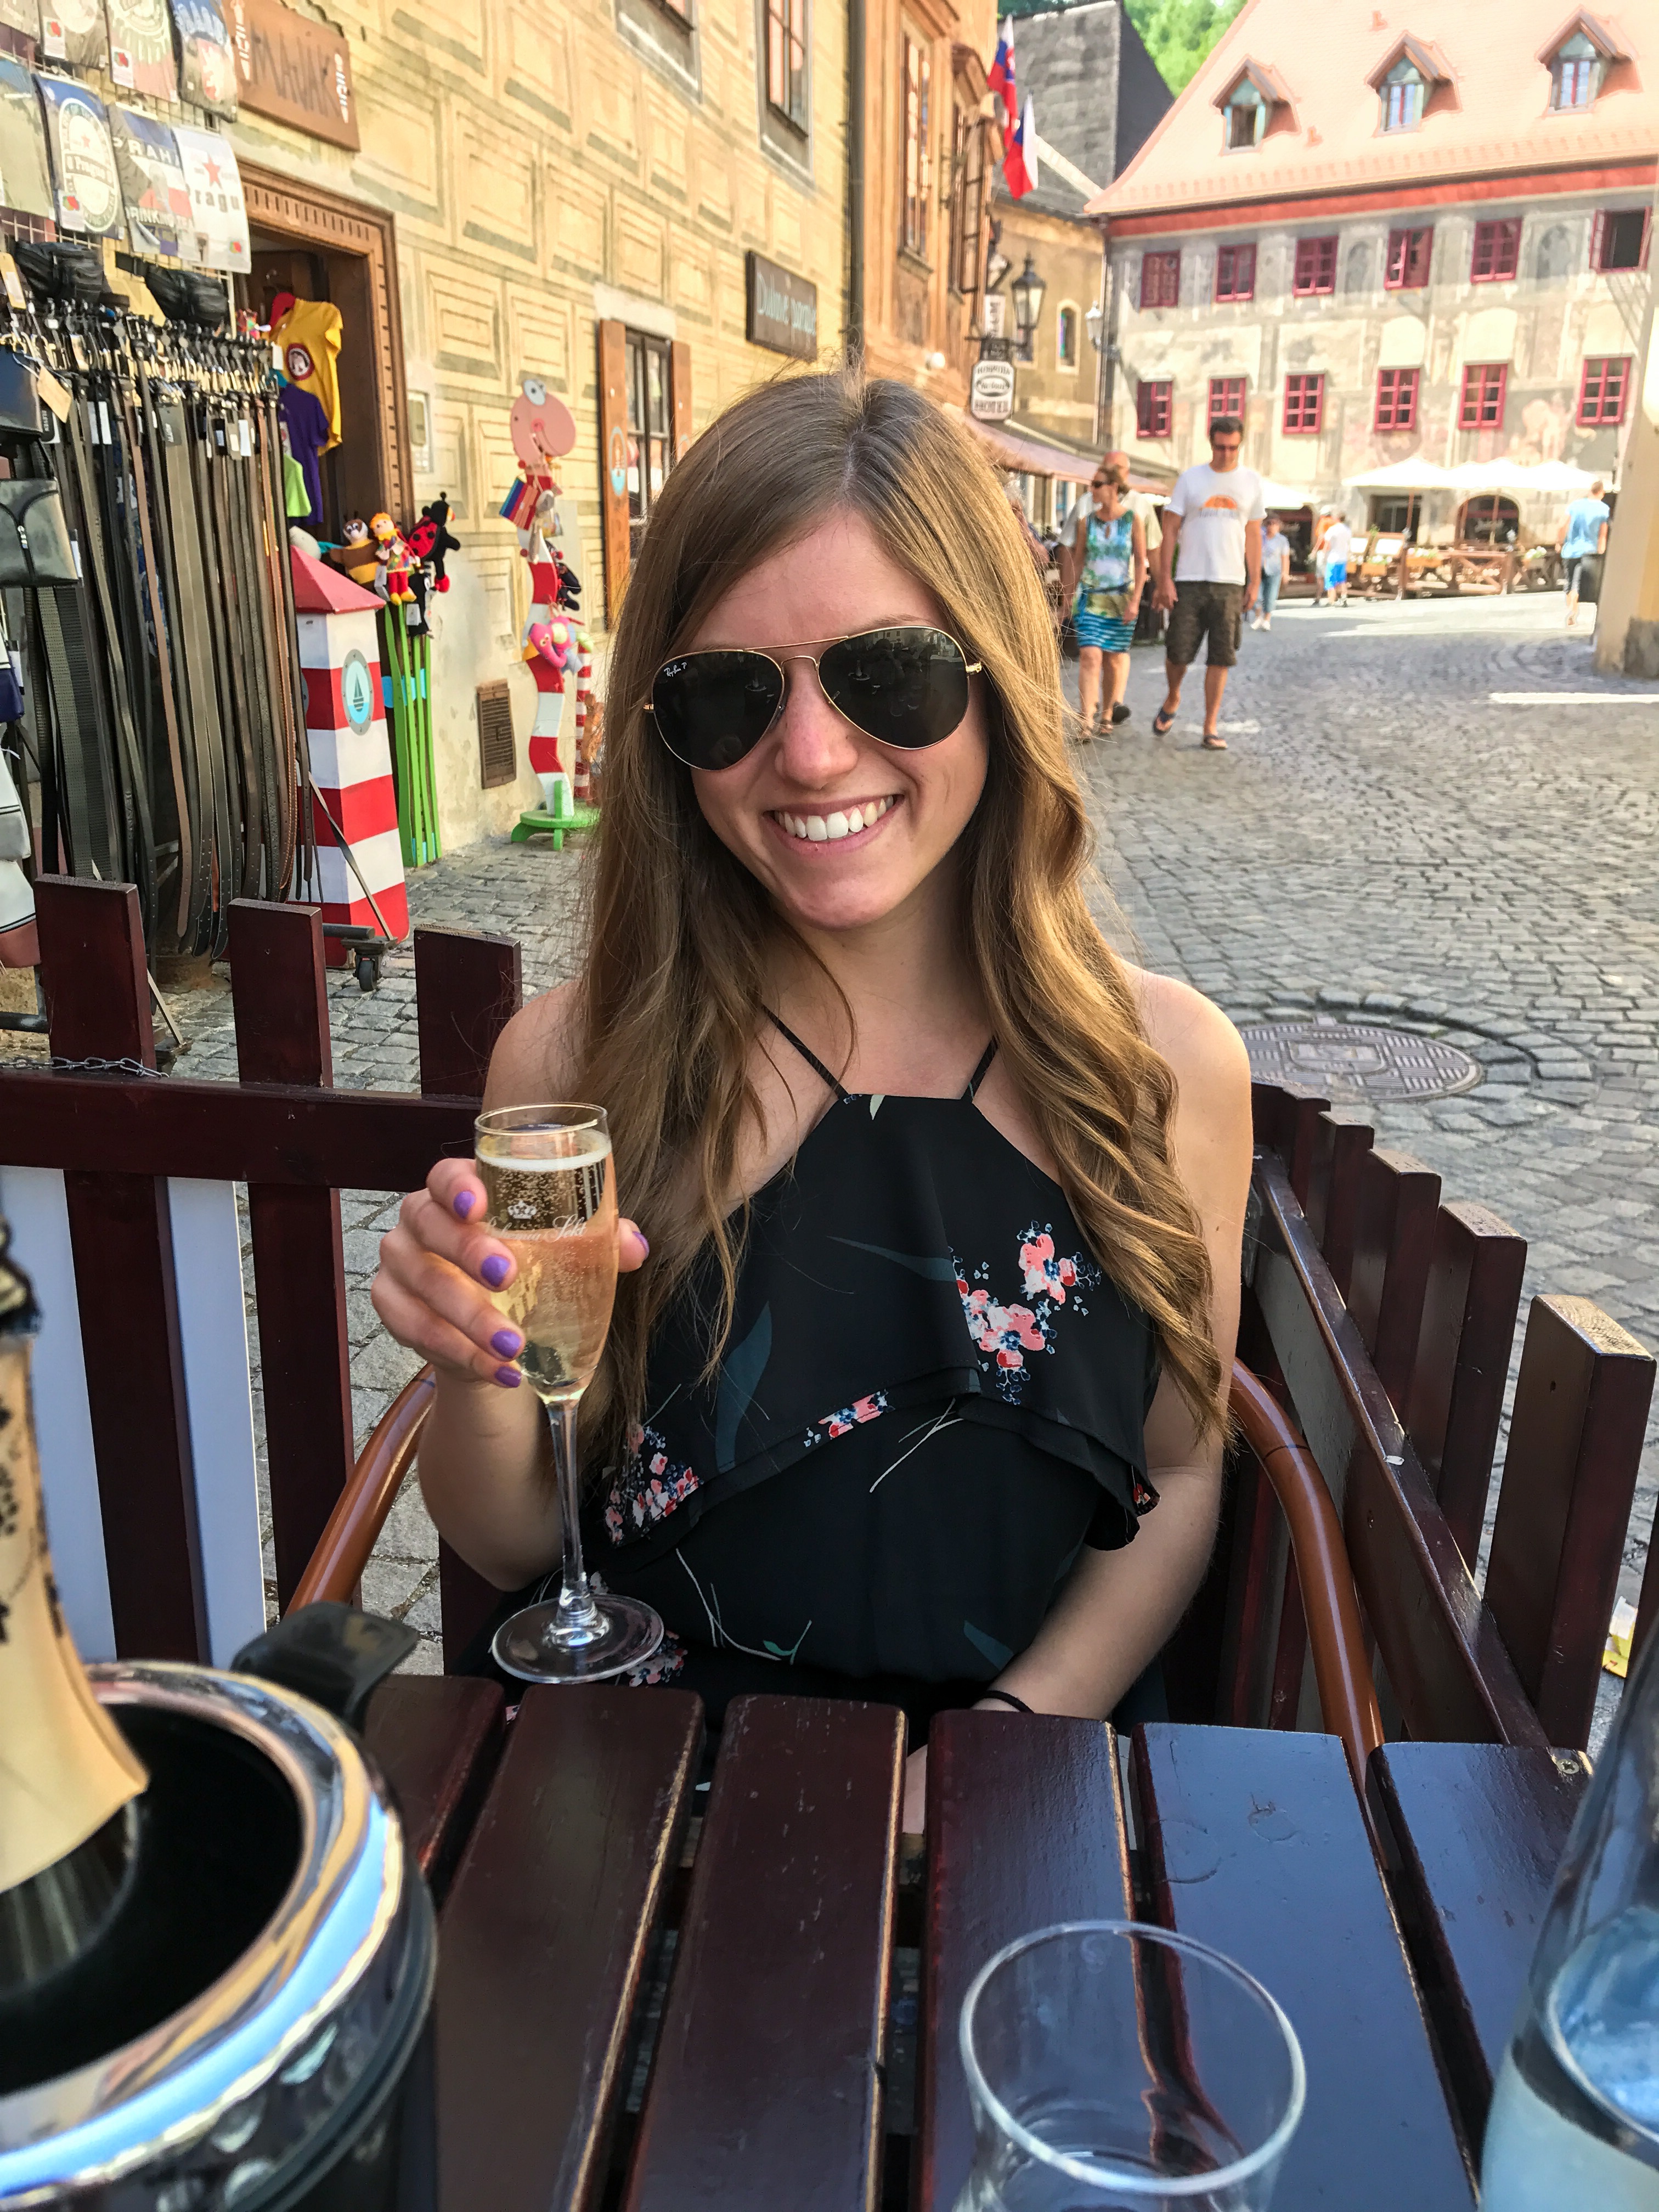 Drinking champagne in the streets of Cesky Krumlov